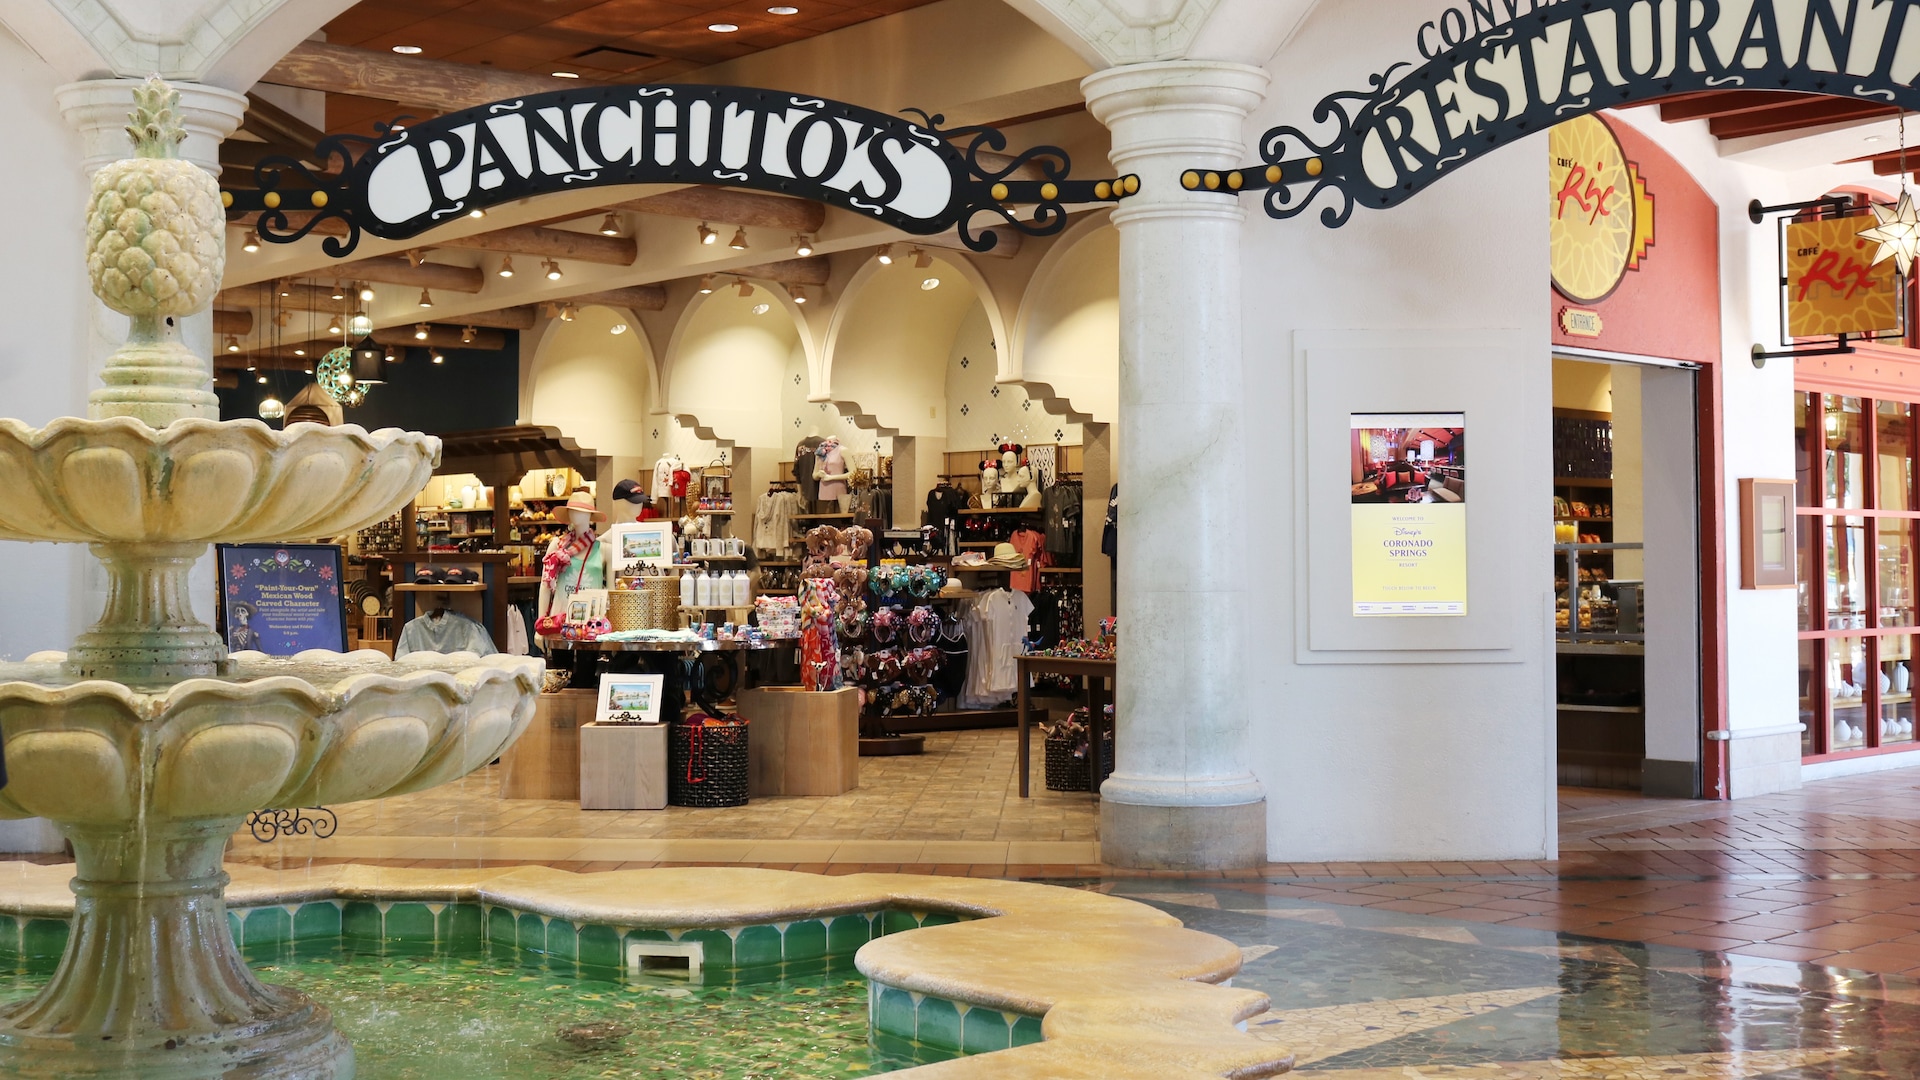 An open air mall setting with a fountain at the entrance of a gift shop called Panchito's